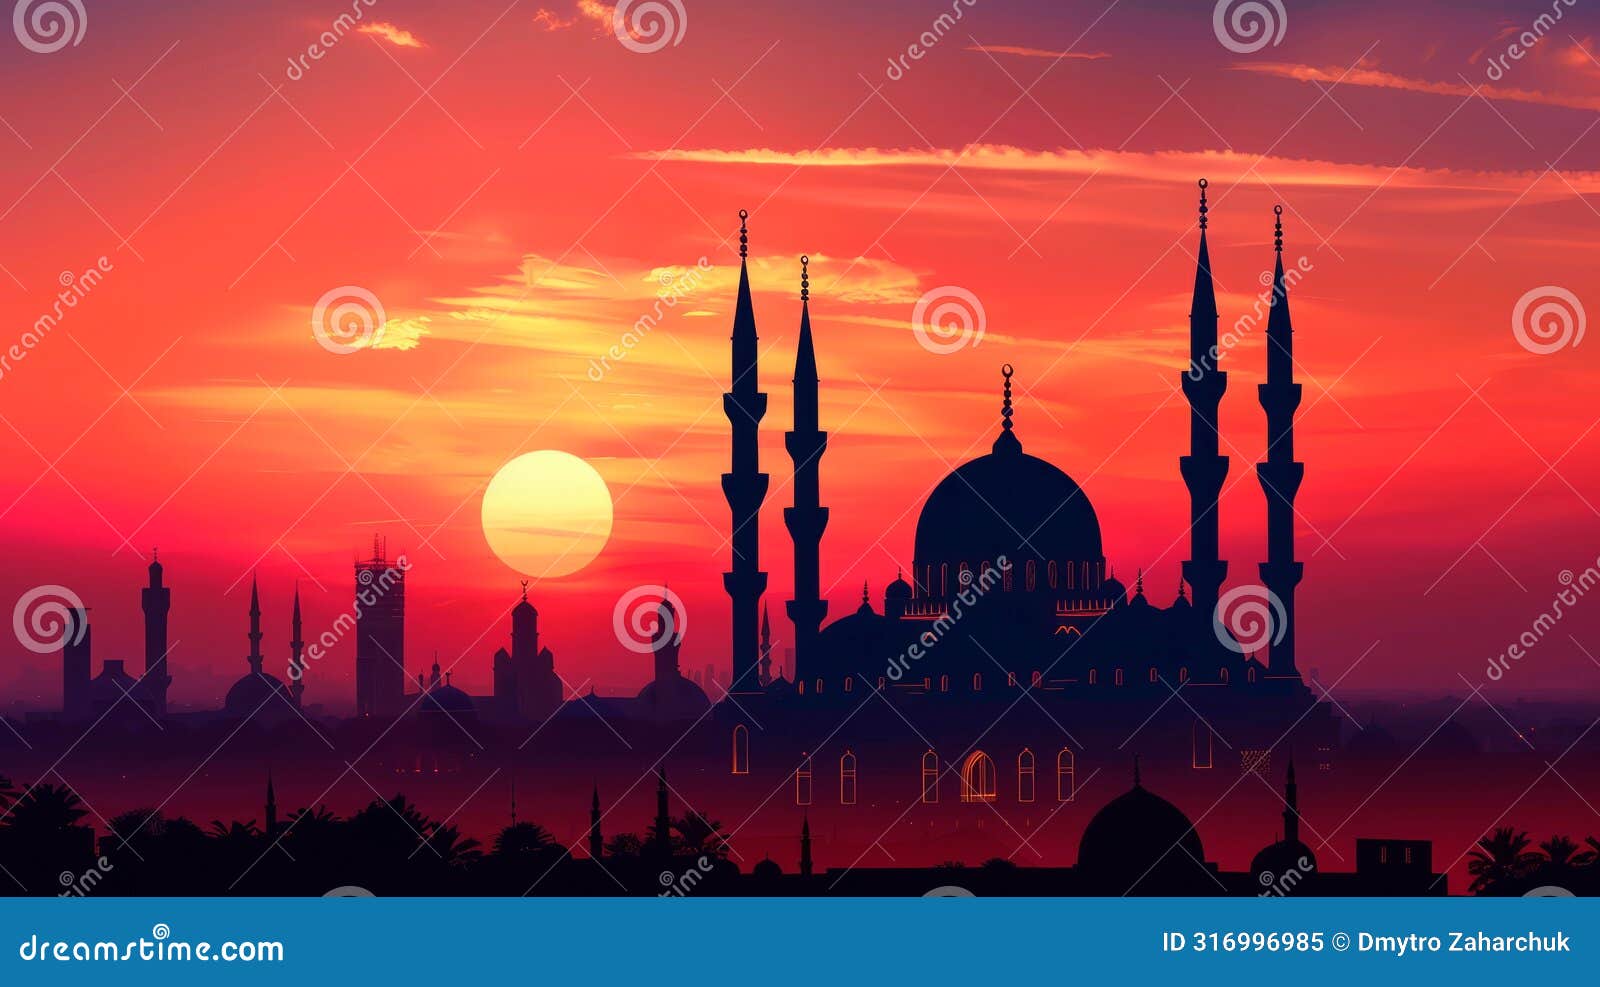 mosque at sunset, with minarets and domes adorned with eid decorations.